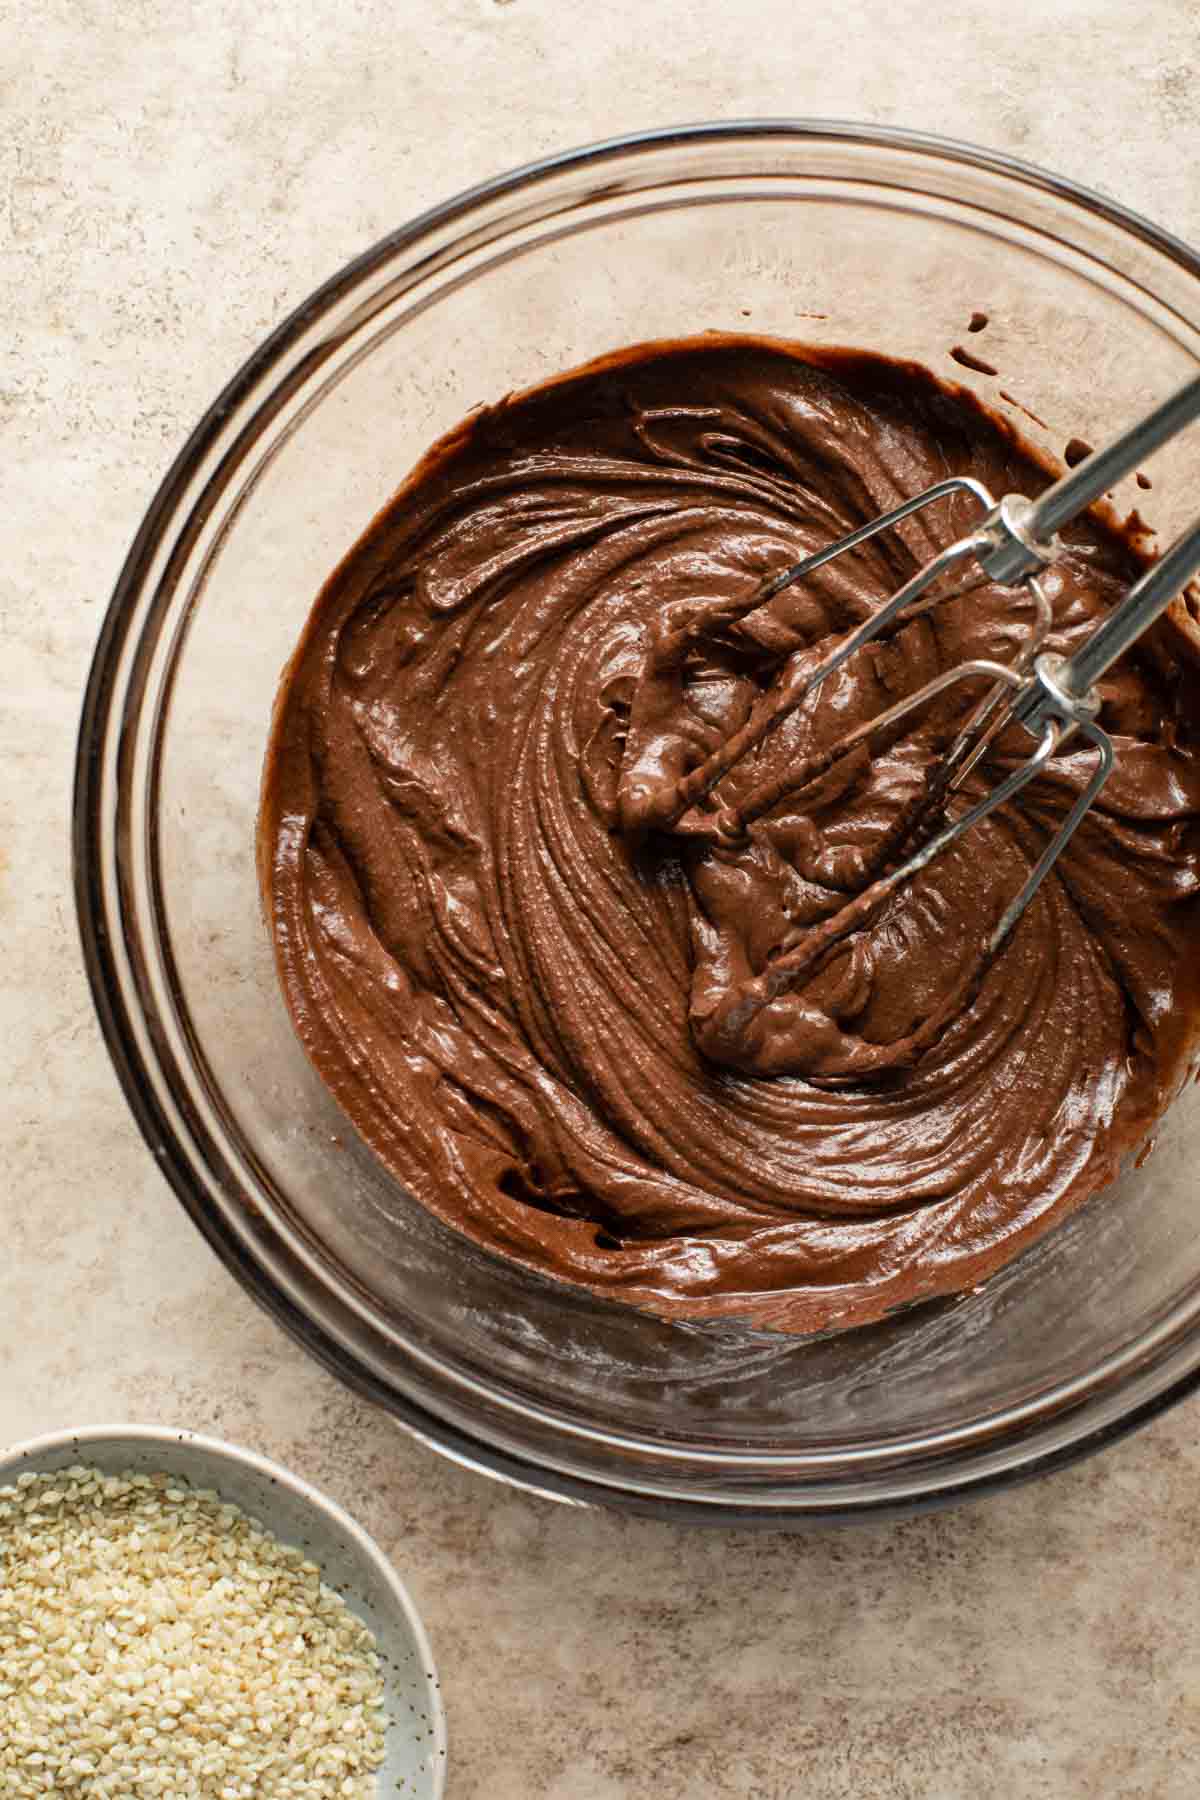 Chocolate tahini frosting in a glass bowl.